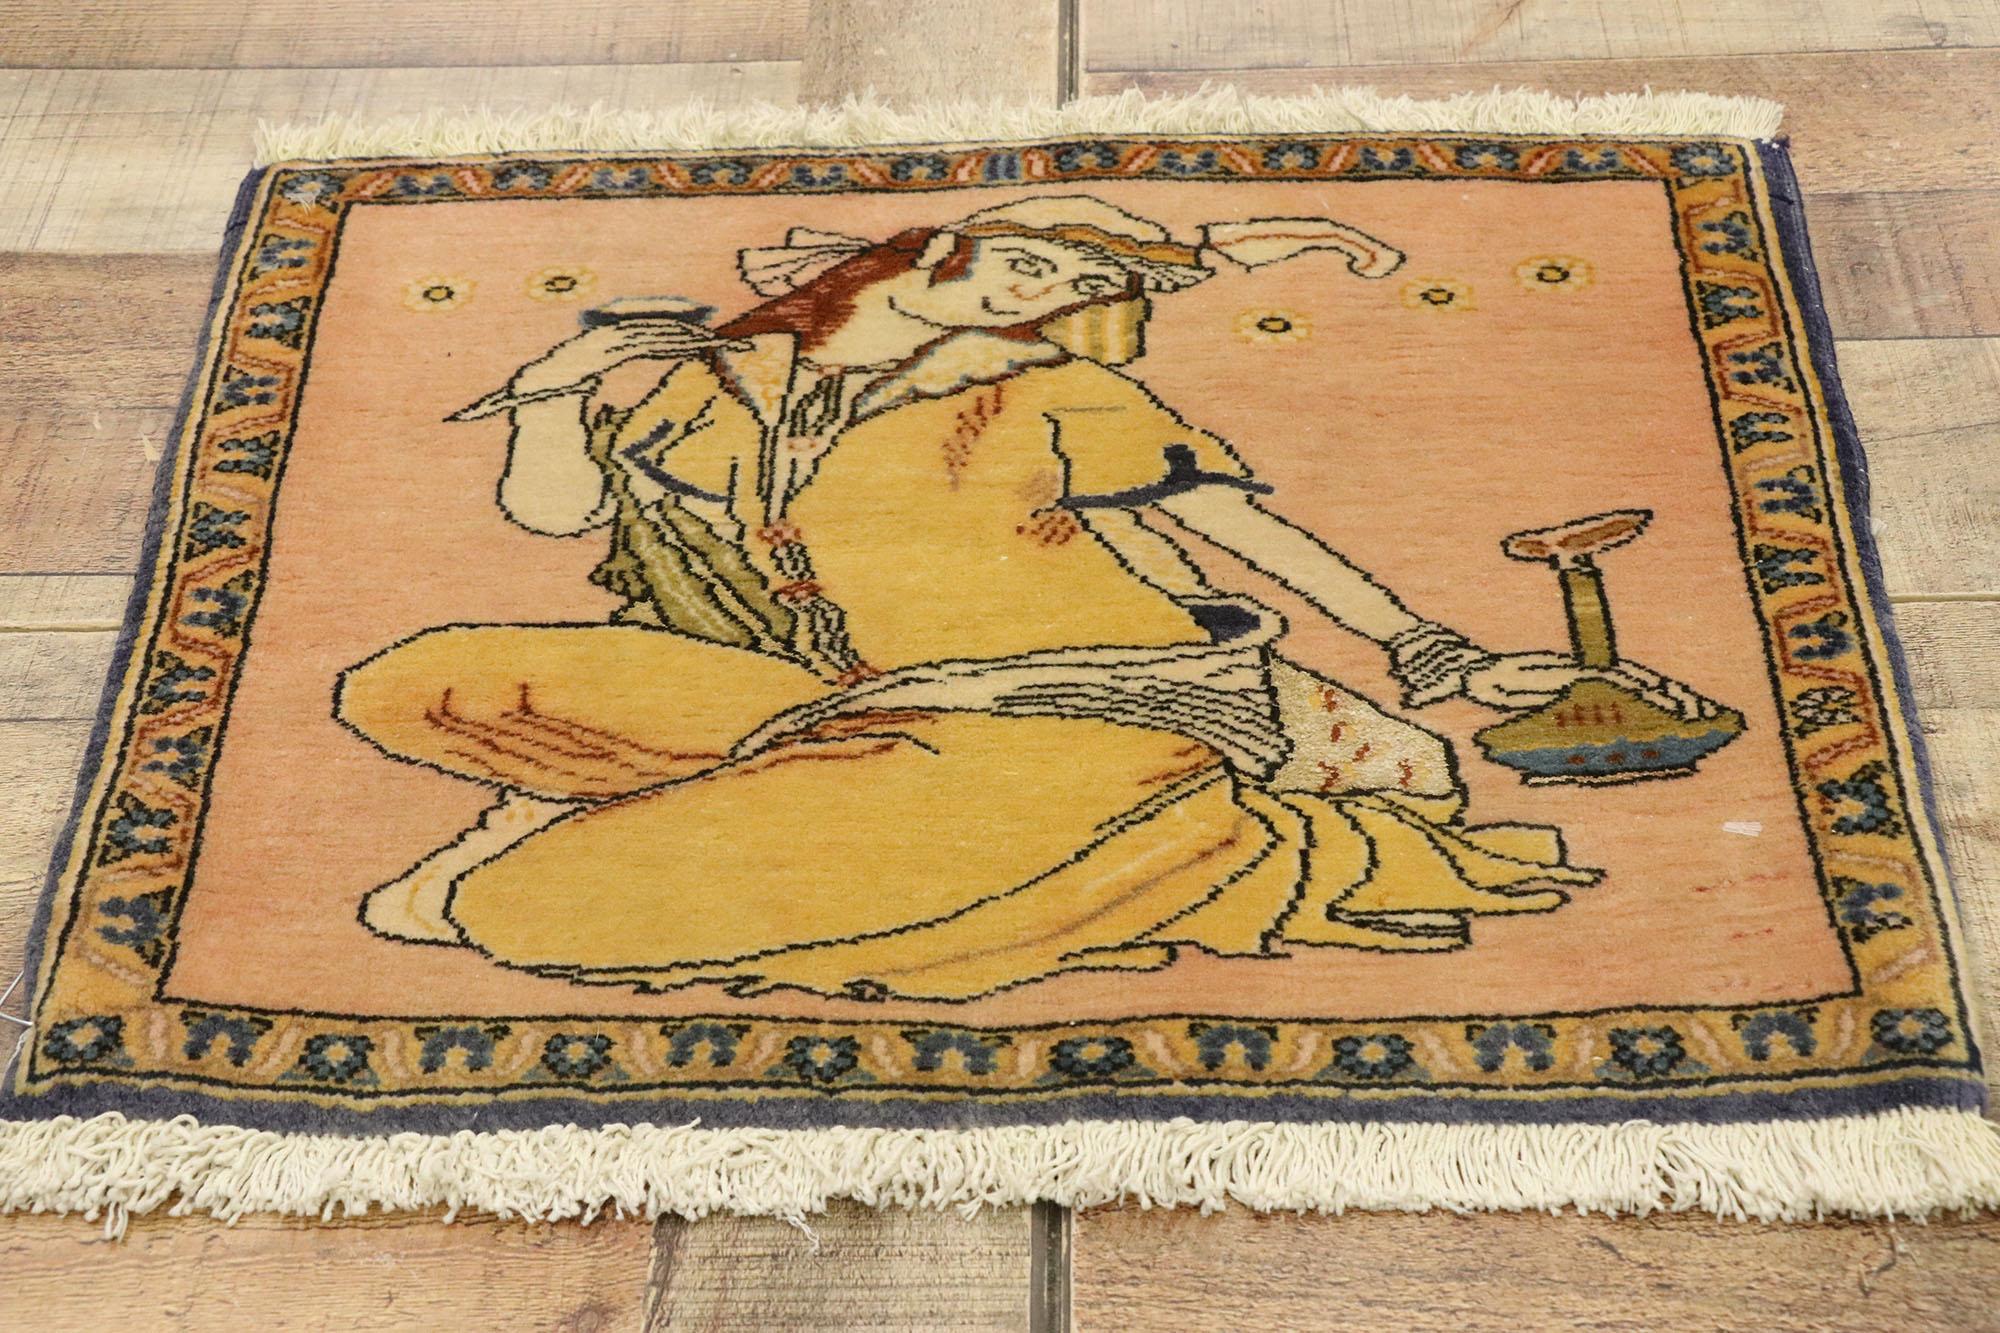 Vintage Persian Khamseh Pictorial Rug with Dervish Scene, Persian Wall Hanging In Good Condition For Sale In Dallas, TX